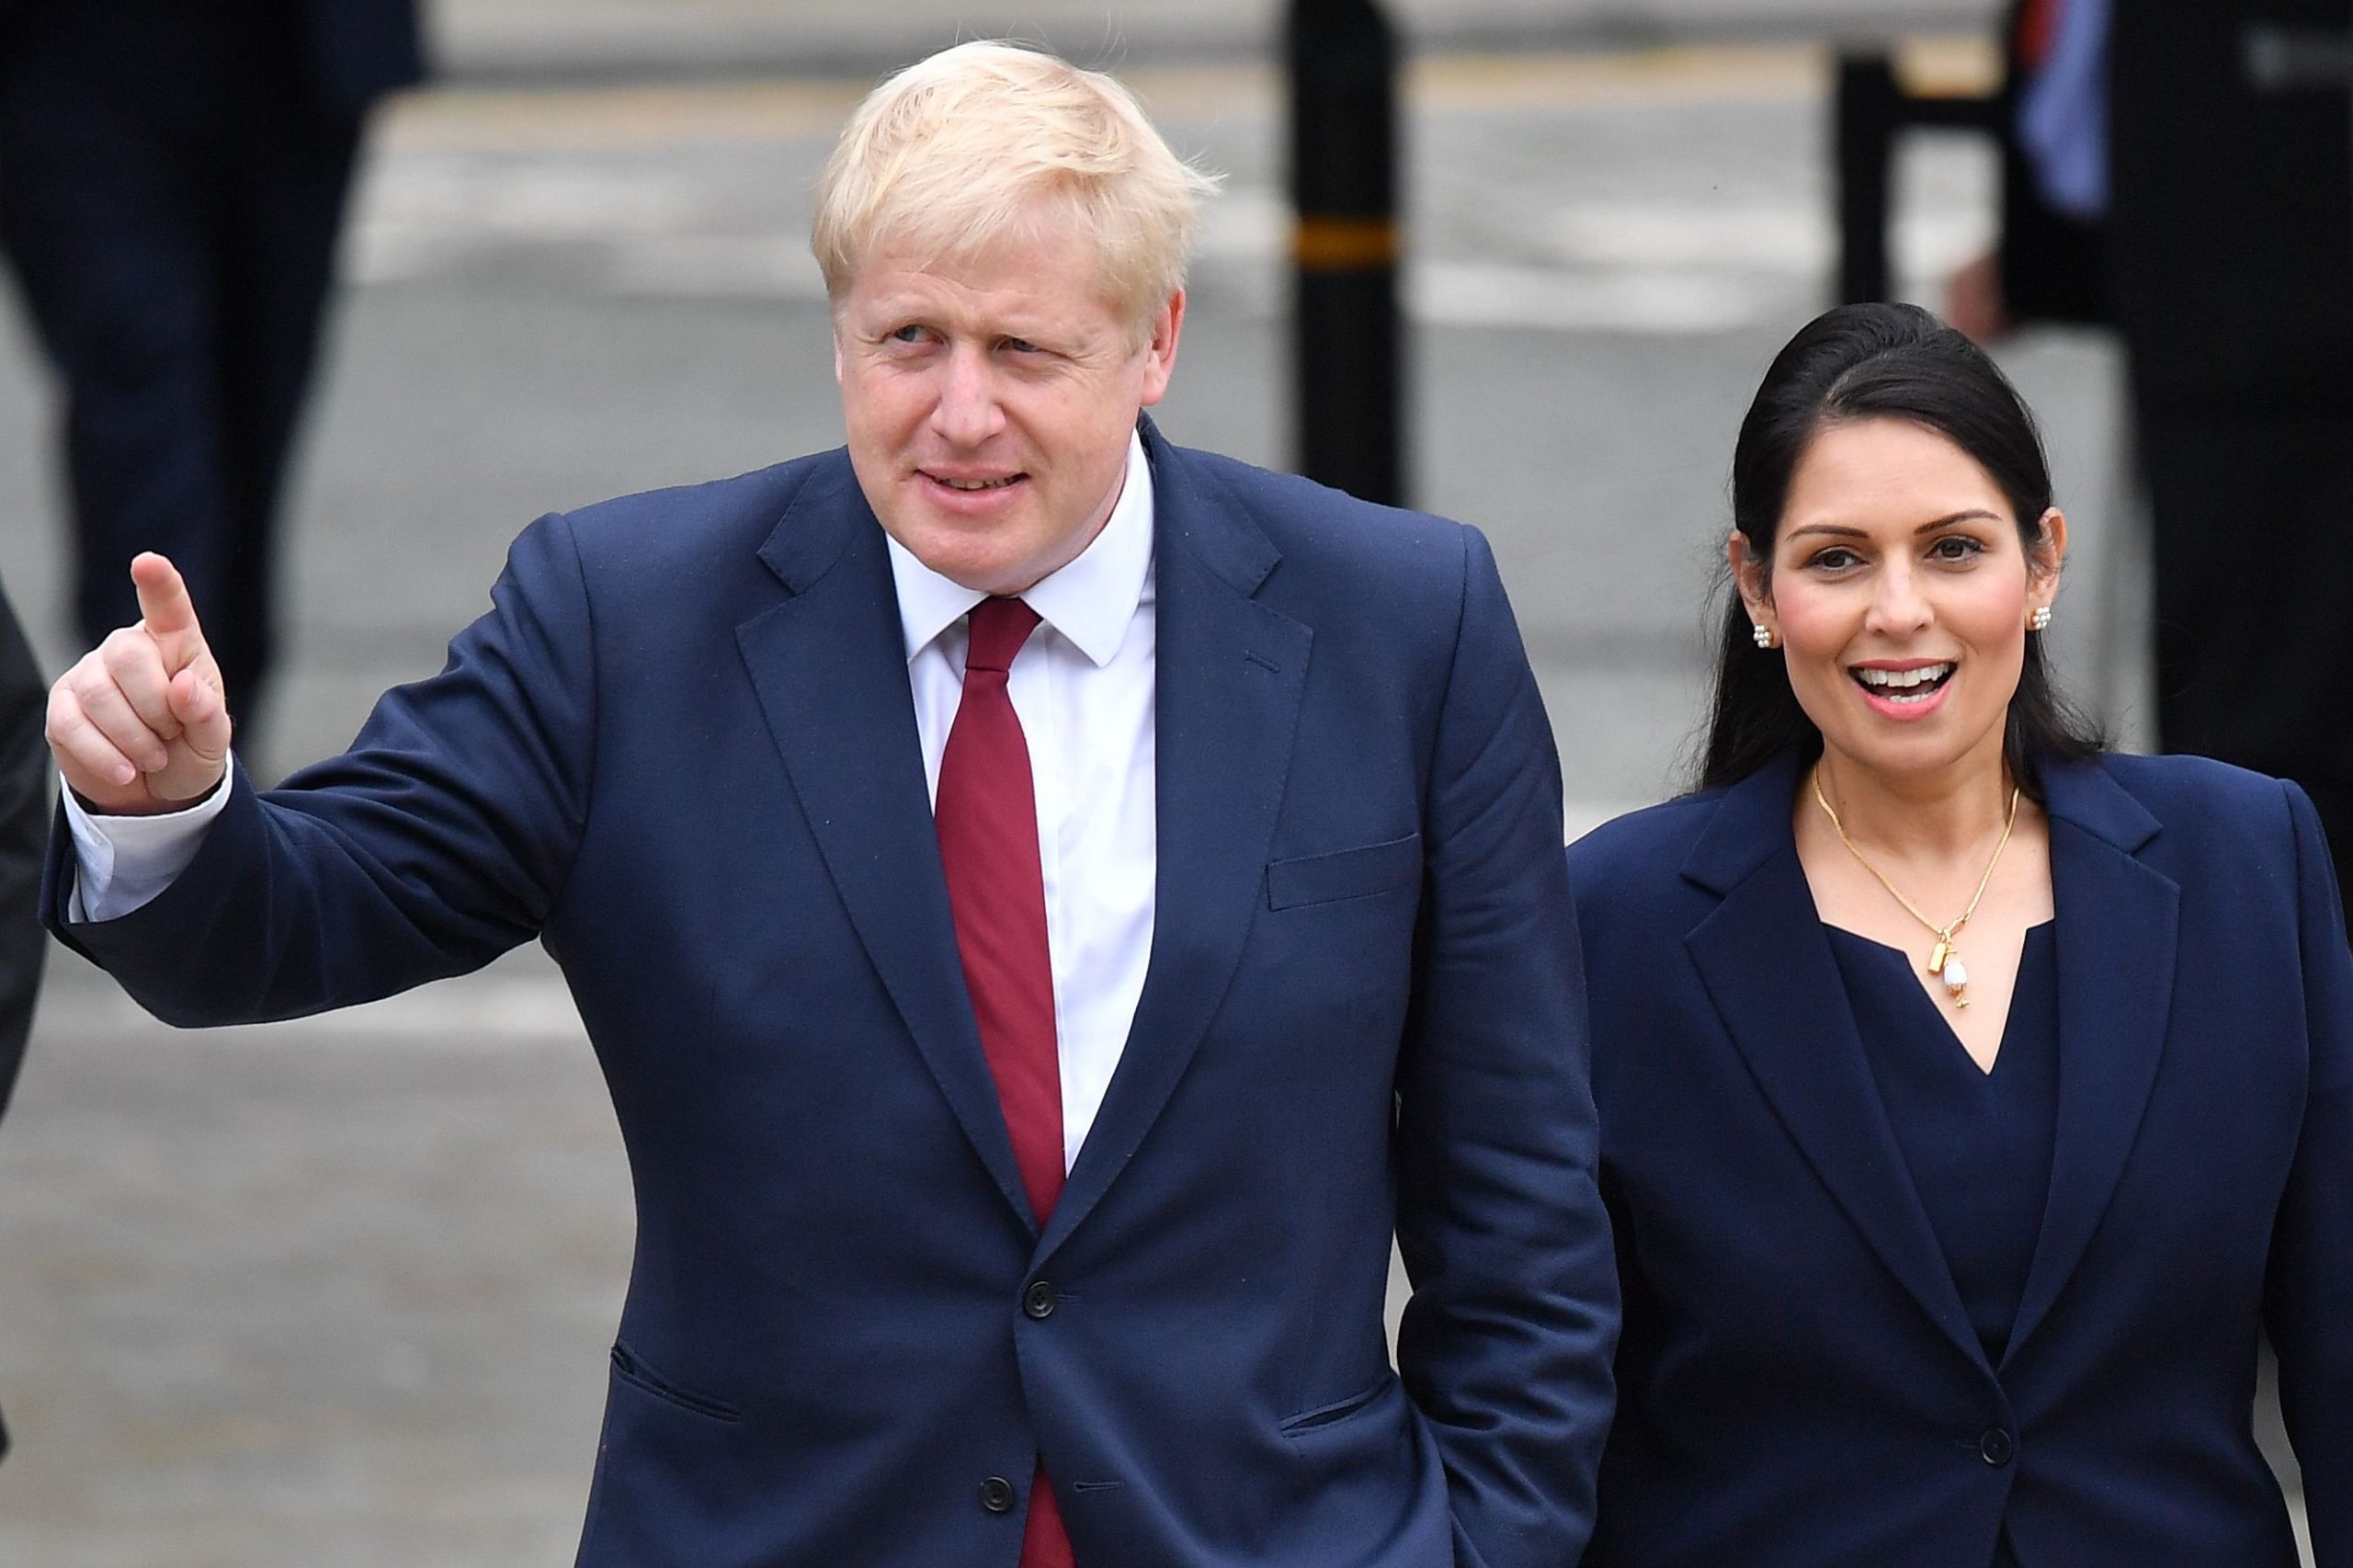 Boris Johnson And Priti Paltel Relationship Here’s Why He Should Sack Her!